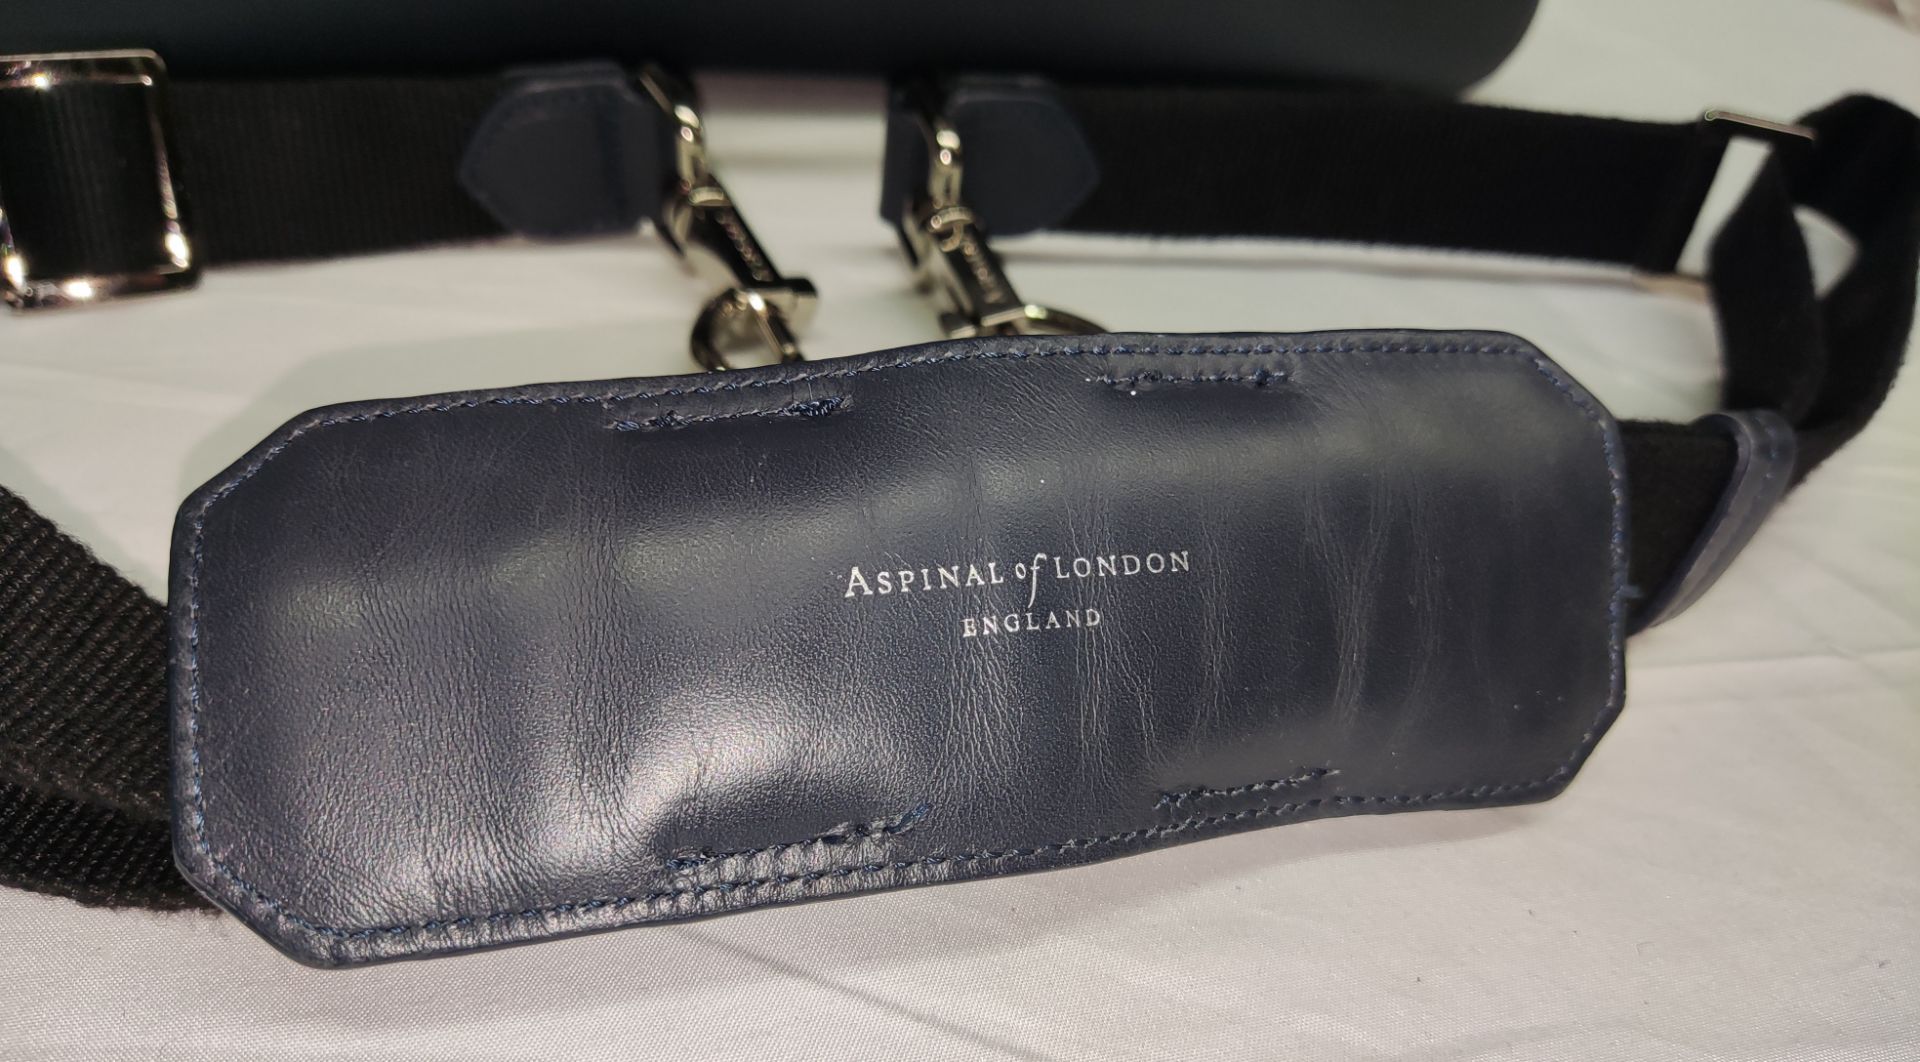 1 x ASPINAL OF LONDON Mount Street Small Laptop Bag In Black Saffiano - Original RRP £650.00 - Image 7 of 21